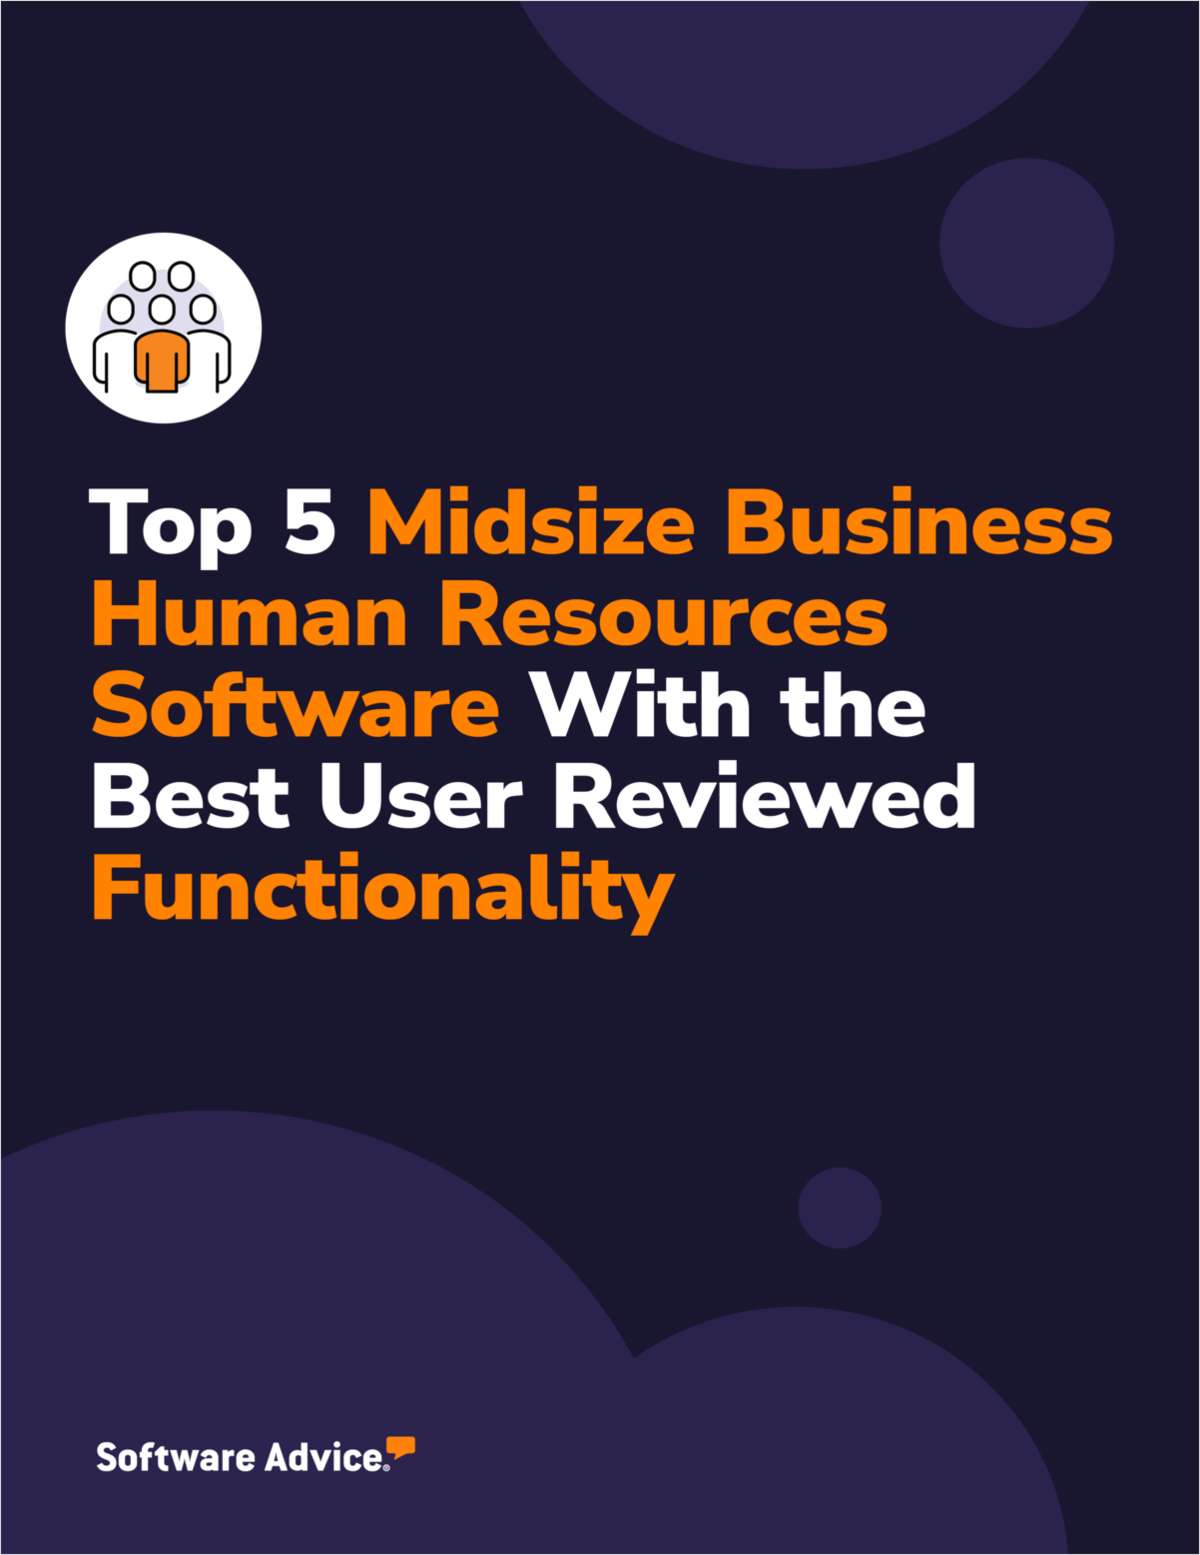 Top 5 Midsize Business Human Resources Software With the Best User Reviewed Functionality